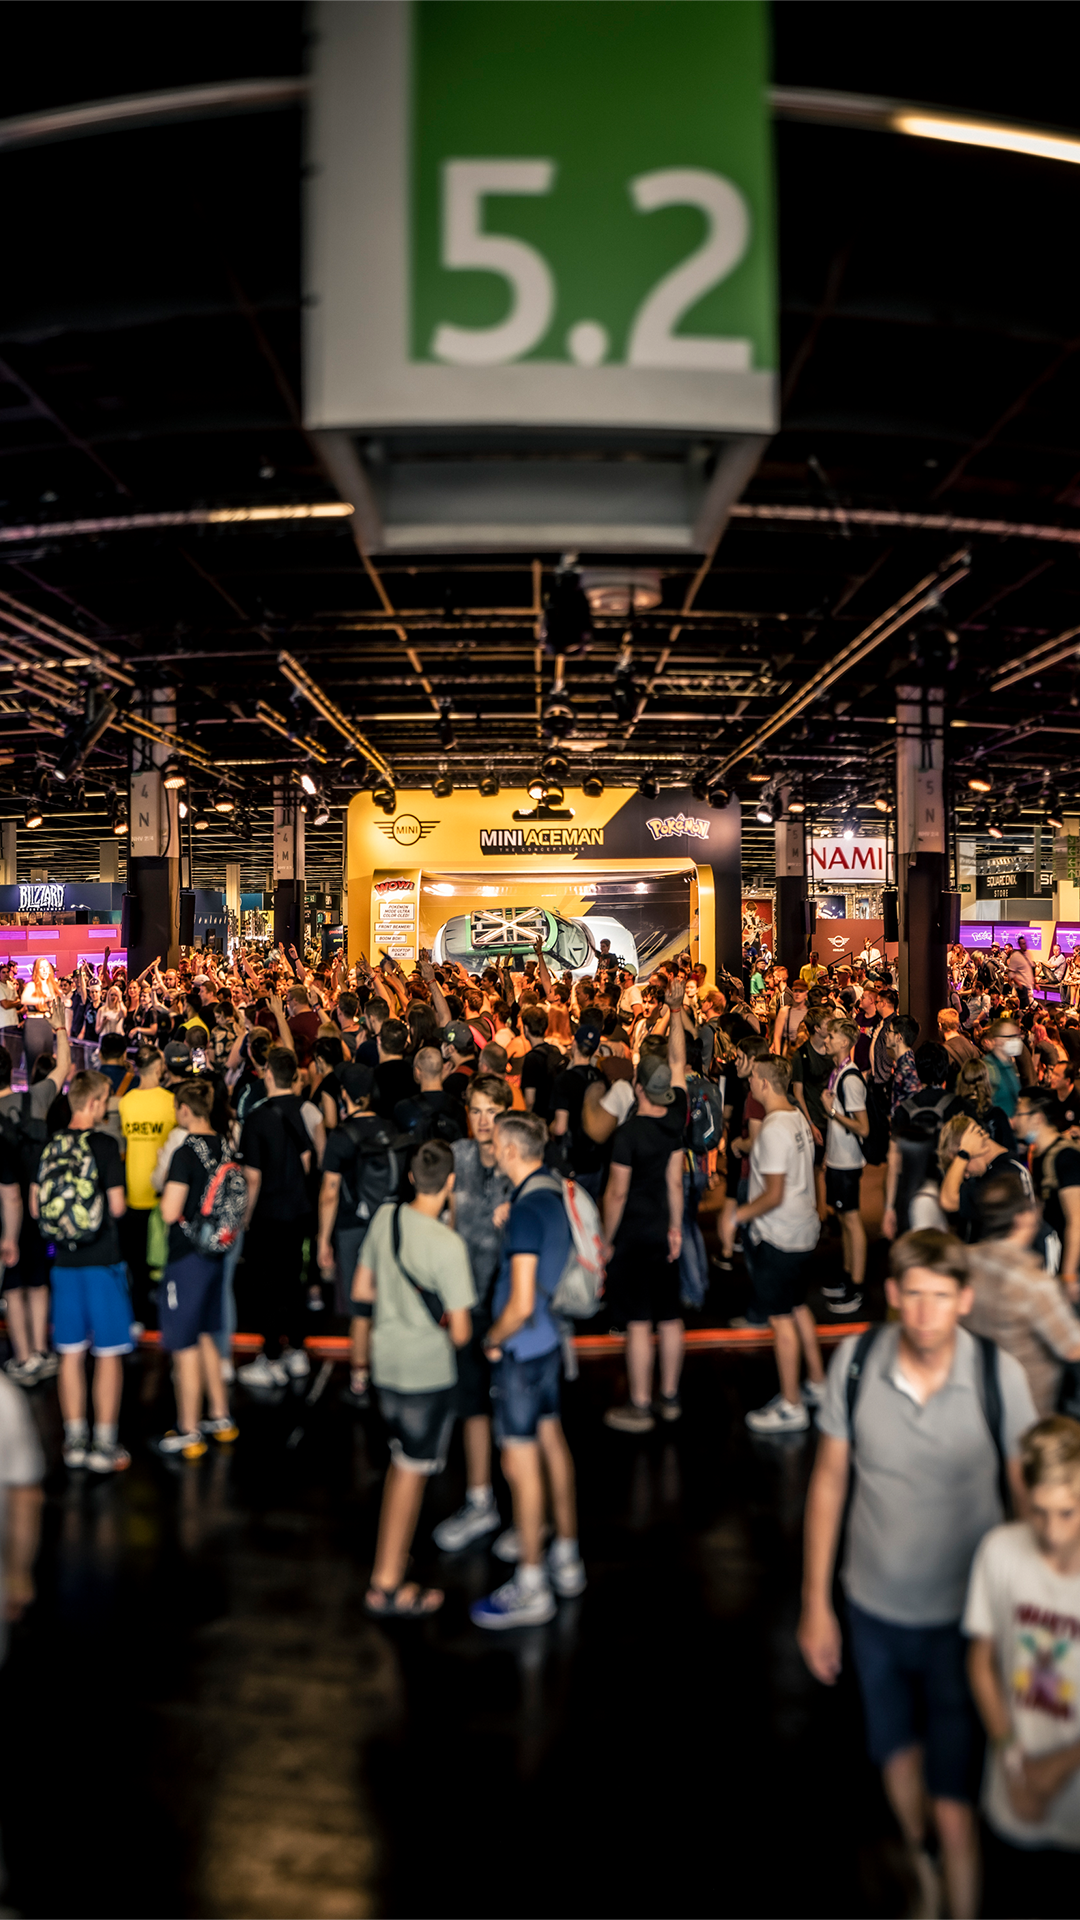 A crowd of people walking through an exhibition hall at gamescom 2022. In the background, the concept car Aceman in life-size toy packaging can be seen.